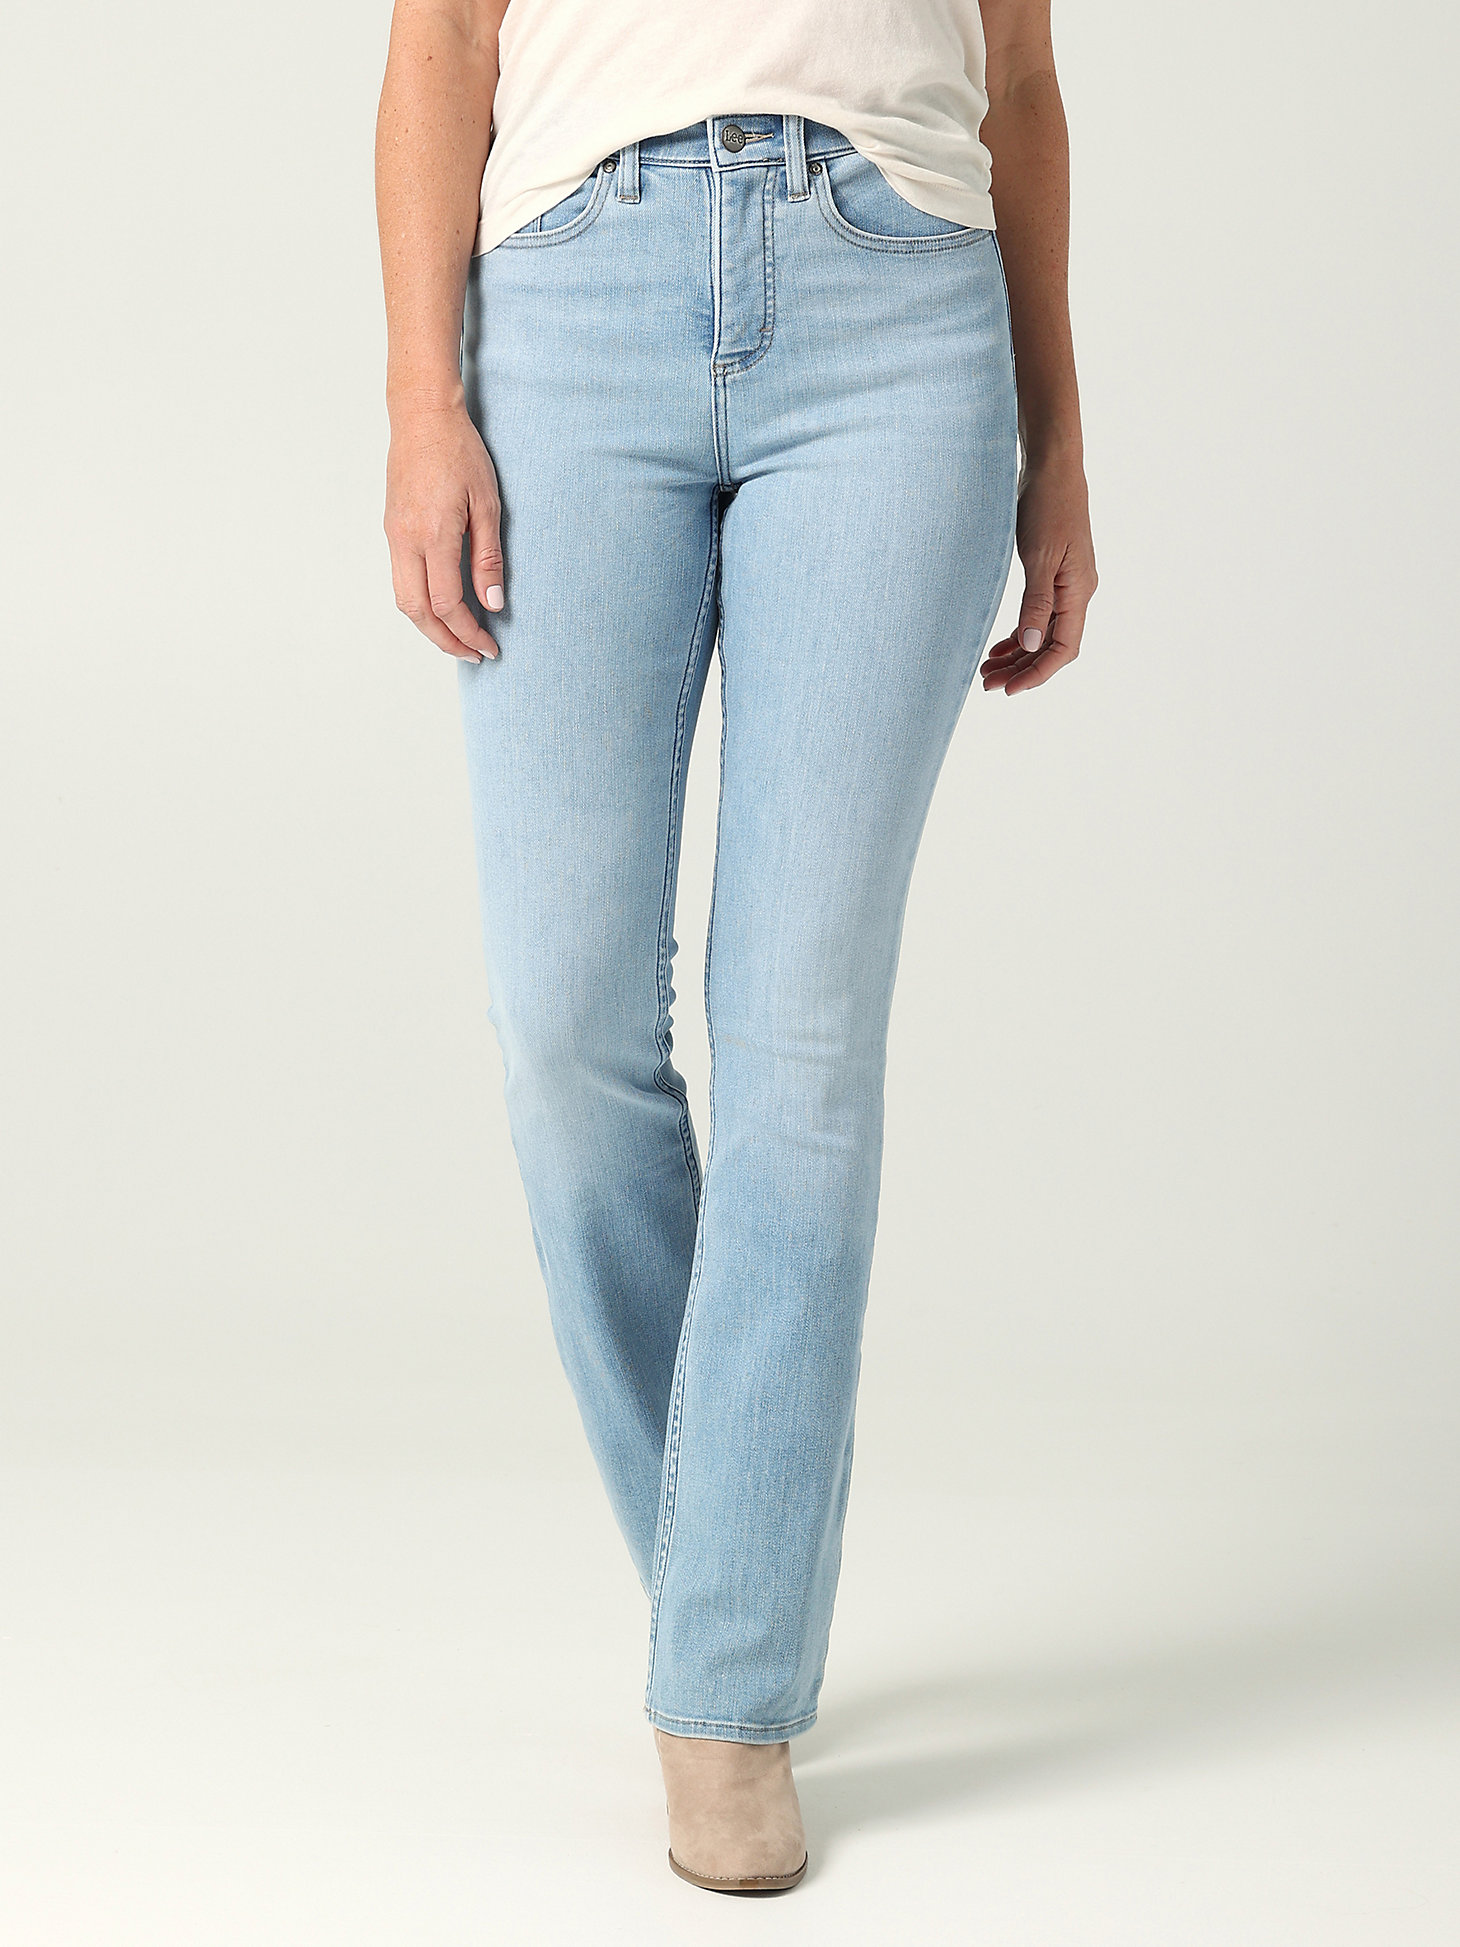 Women's Ultra Lux High Rise Bootcut Jean in Working Light main view